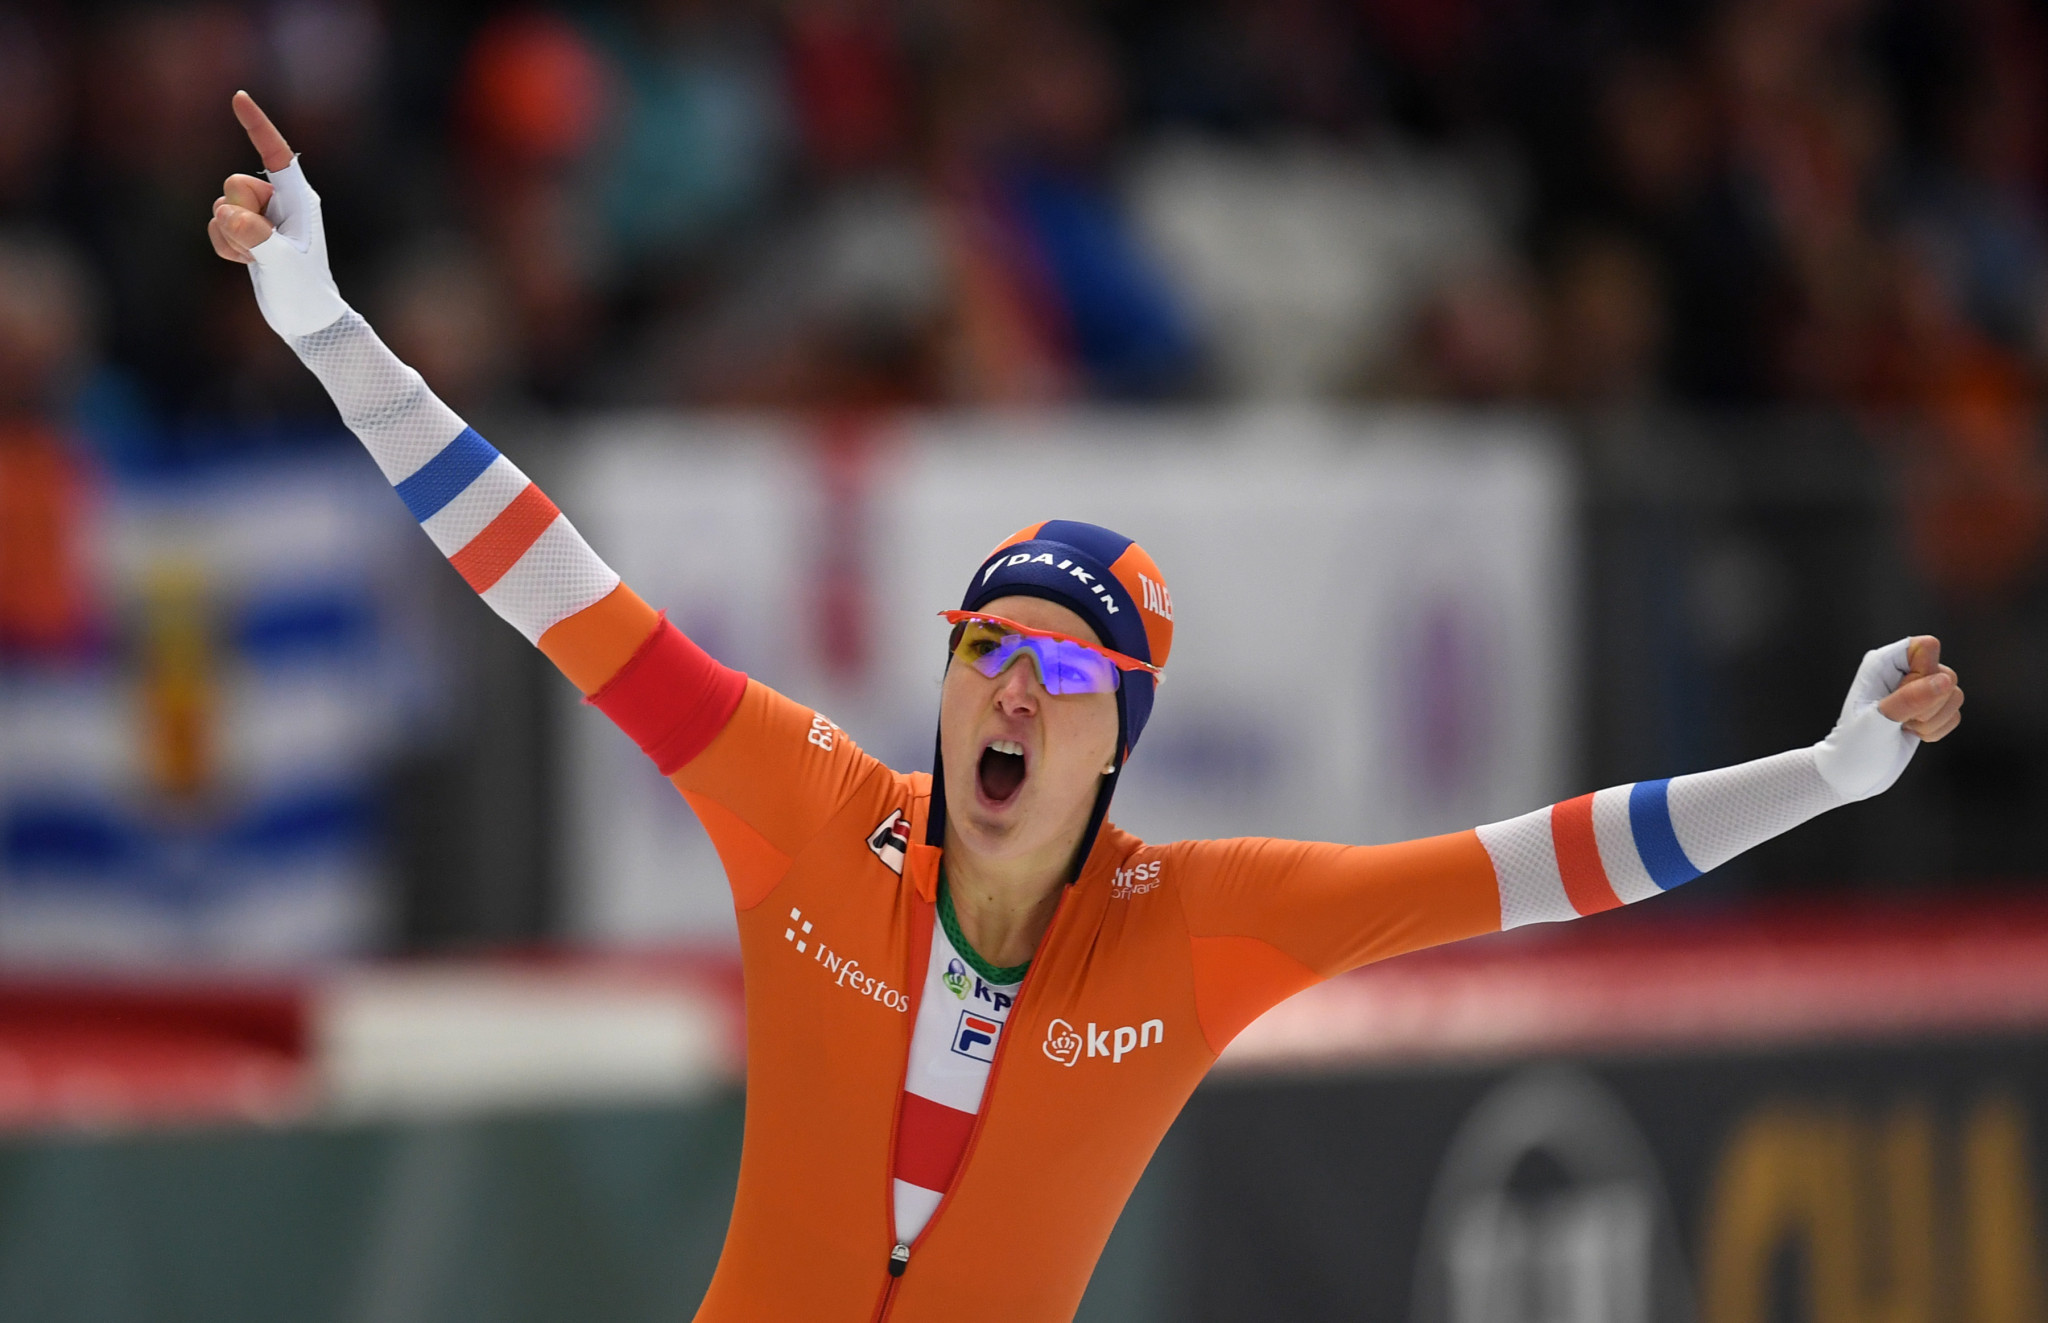 Wüst and Krol secure gold as Dutch dominate final day at ISU World Single Distances Speed Skating Championships